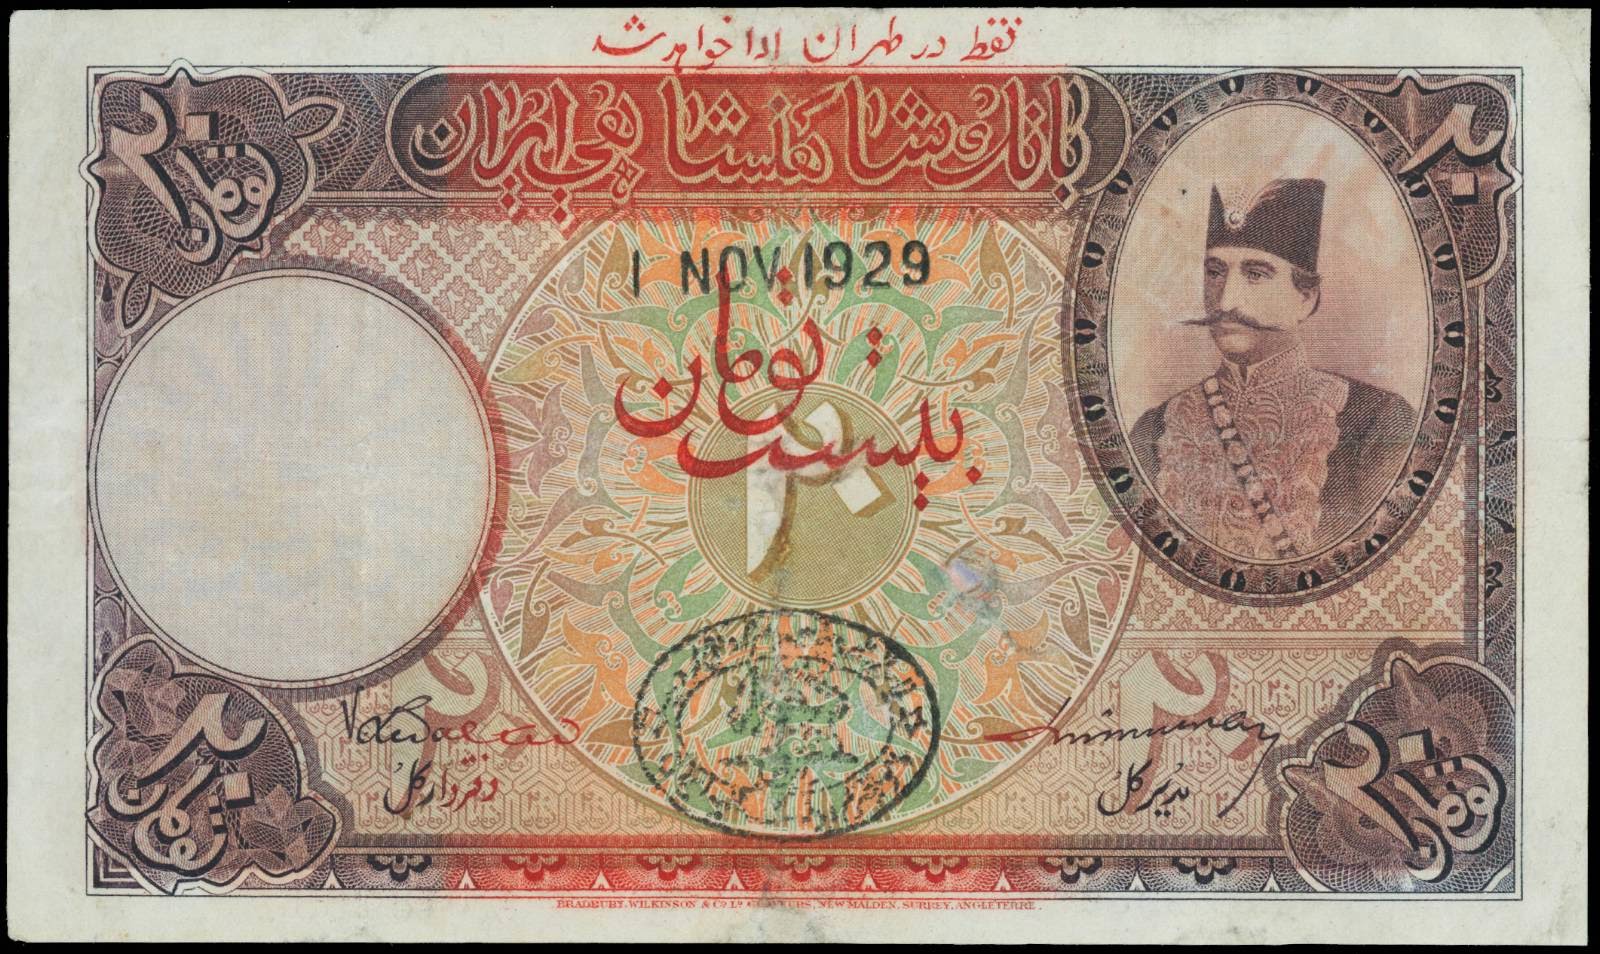 Iran 20 Tomans note 1929 Imperial bank of Persia, Naser al-Din Shah